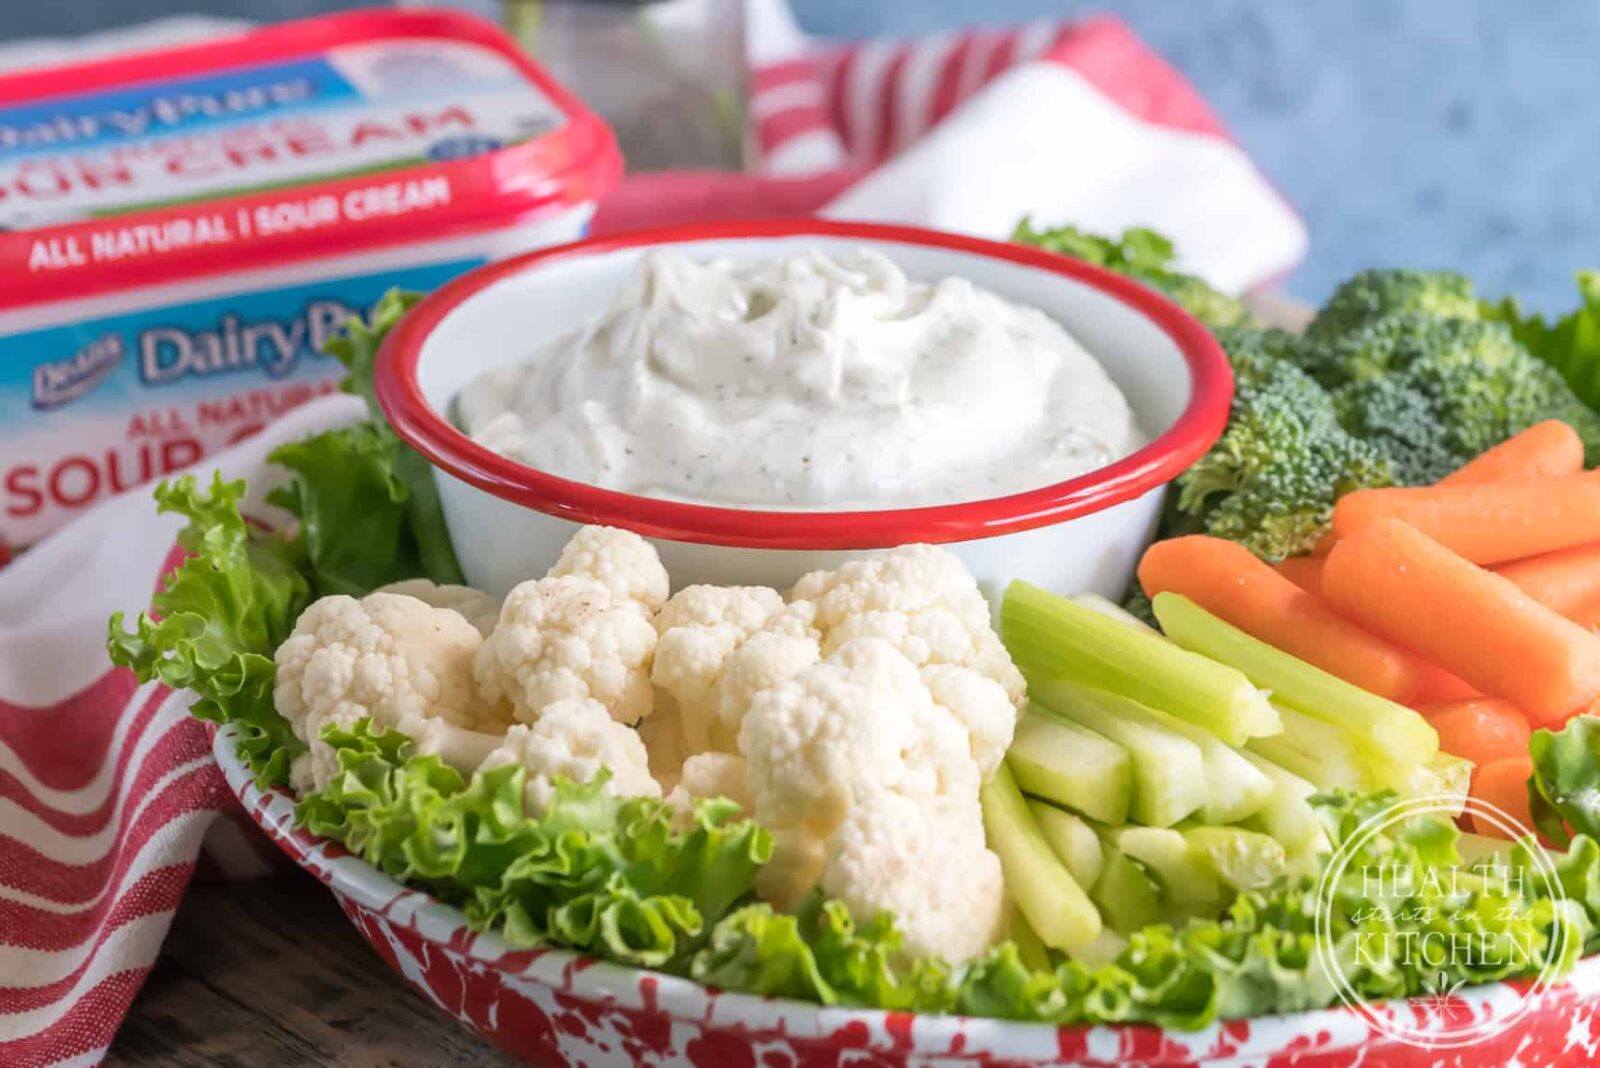 The Best Ranch You'll Ever Eat with Dean's Dairy Pure Sour Cream